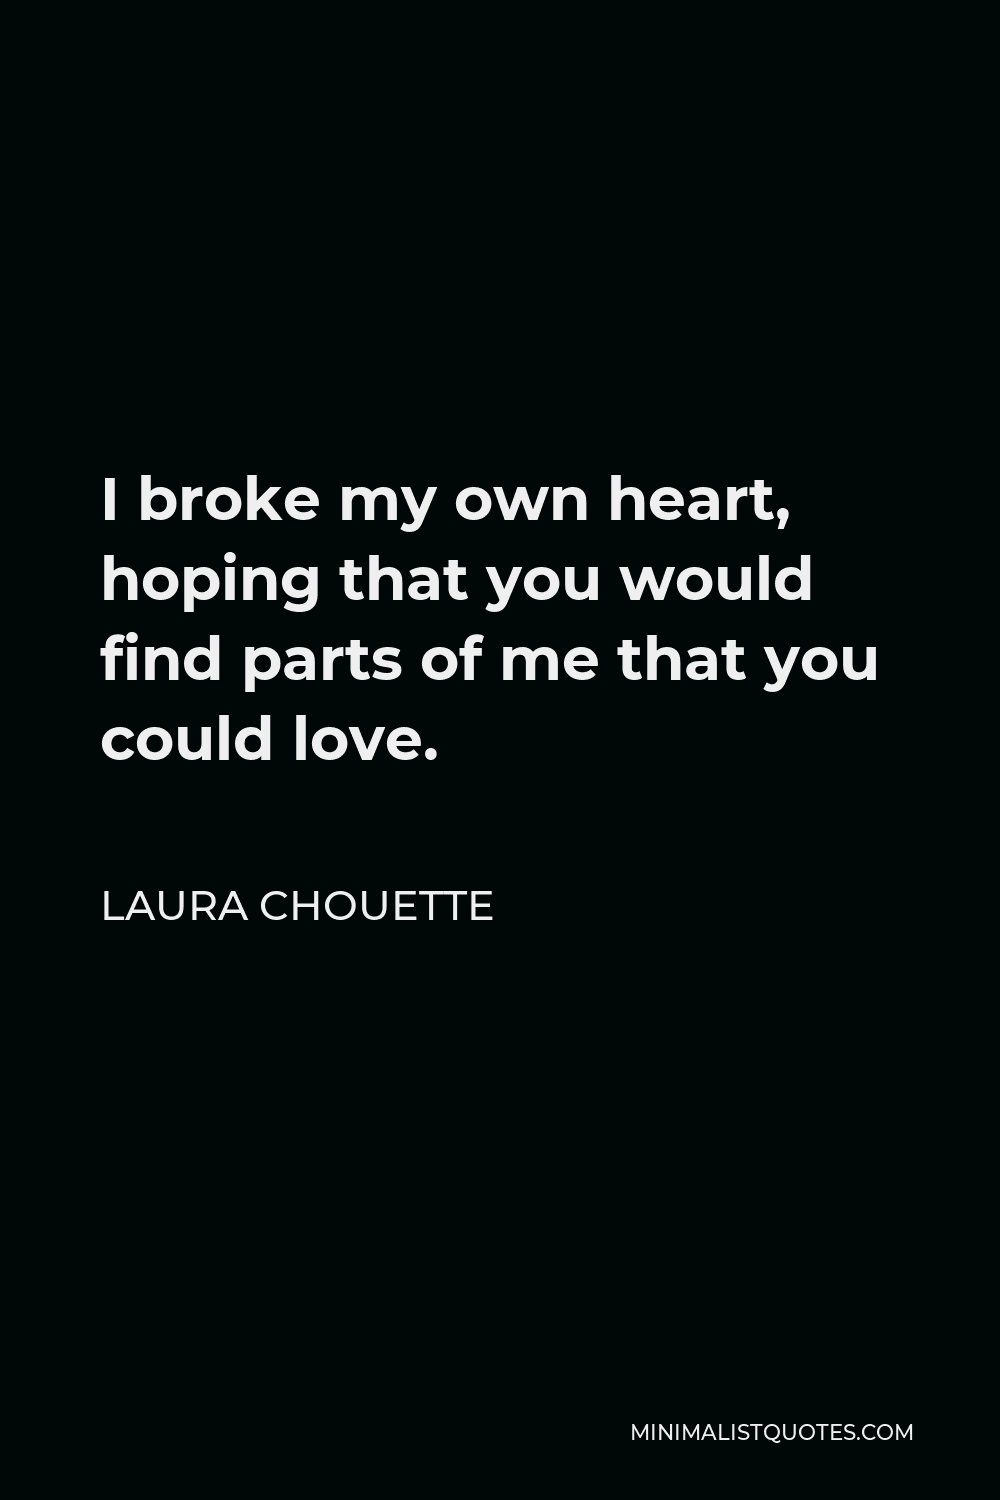 Laura Chouette Quote - I broke my own heart, hoping that you would find parts of me that you could love.